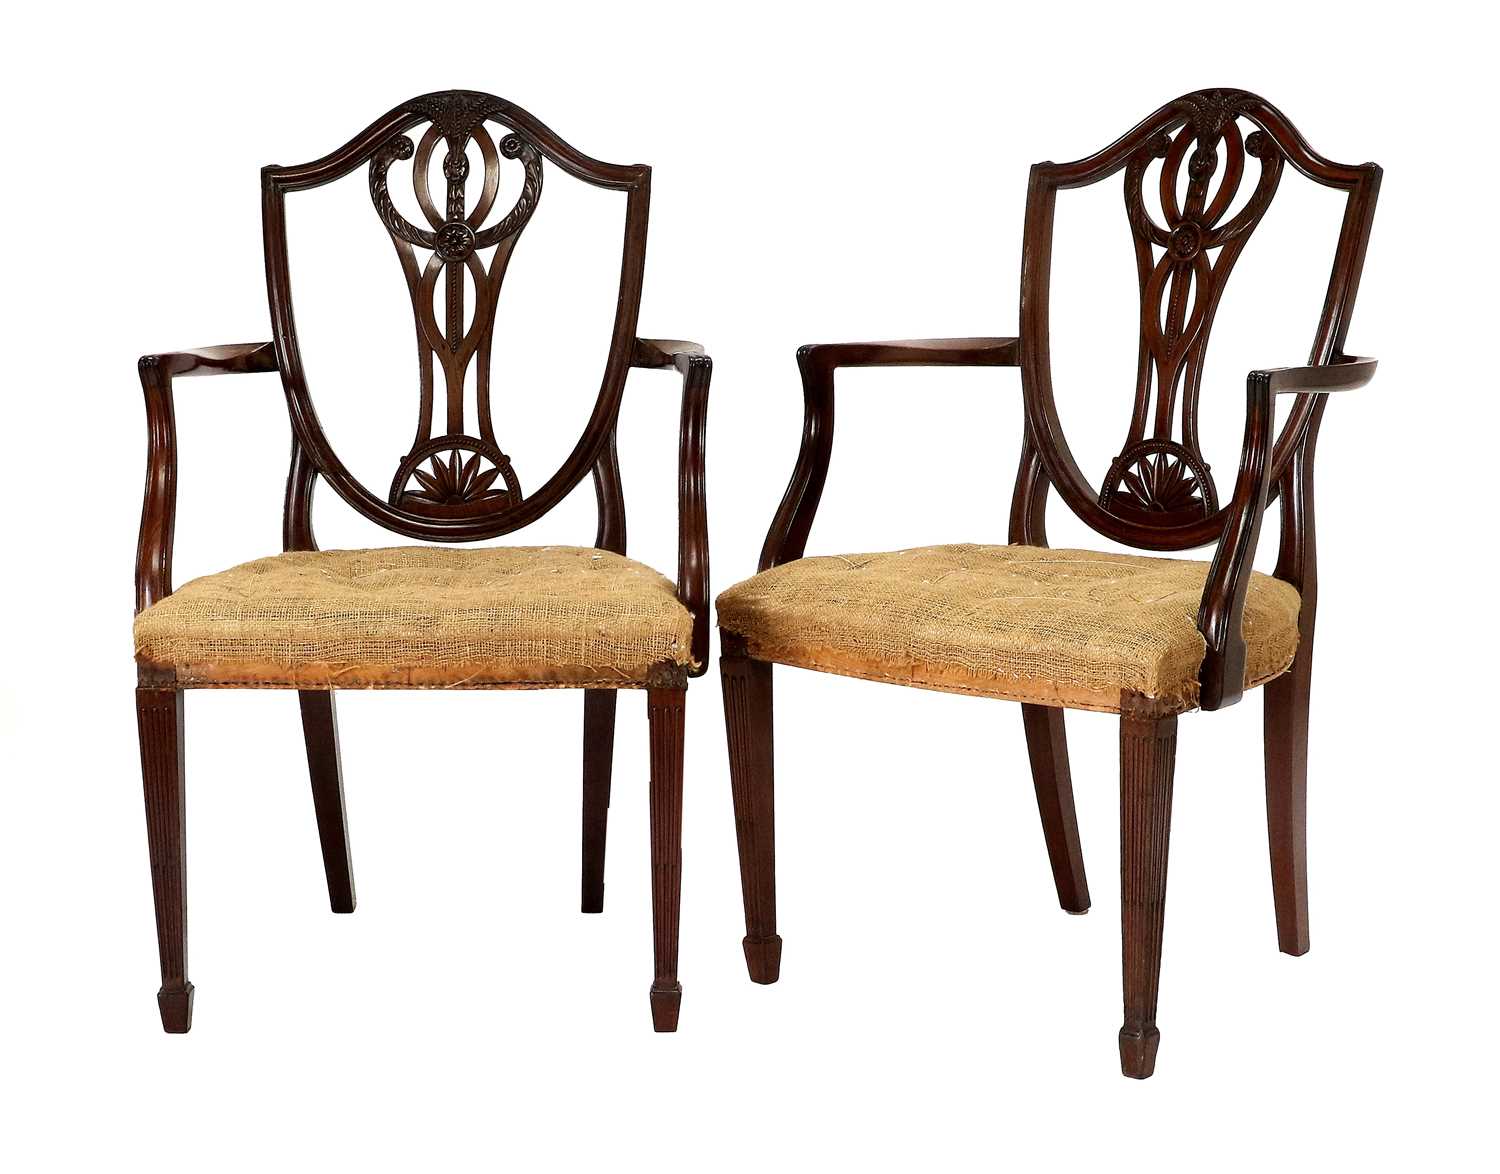 A Set of Six (4+2) George III Hepplewhite-Style Dining Chairs, late 18th century, the shield- - Image 3 of 3